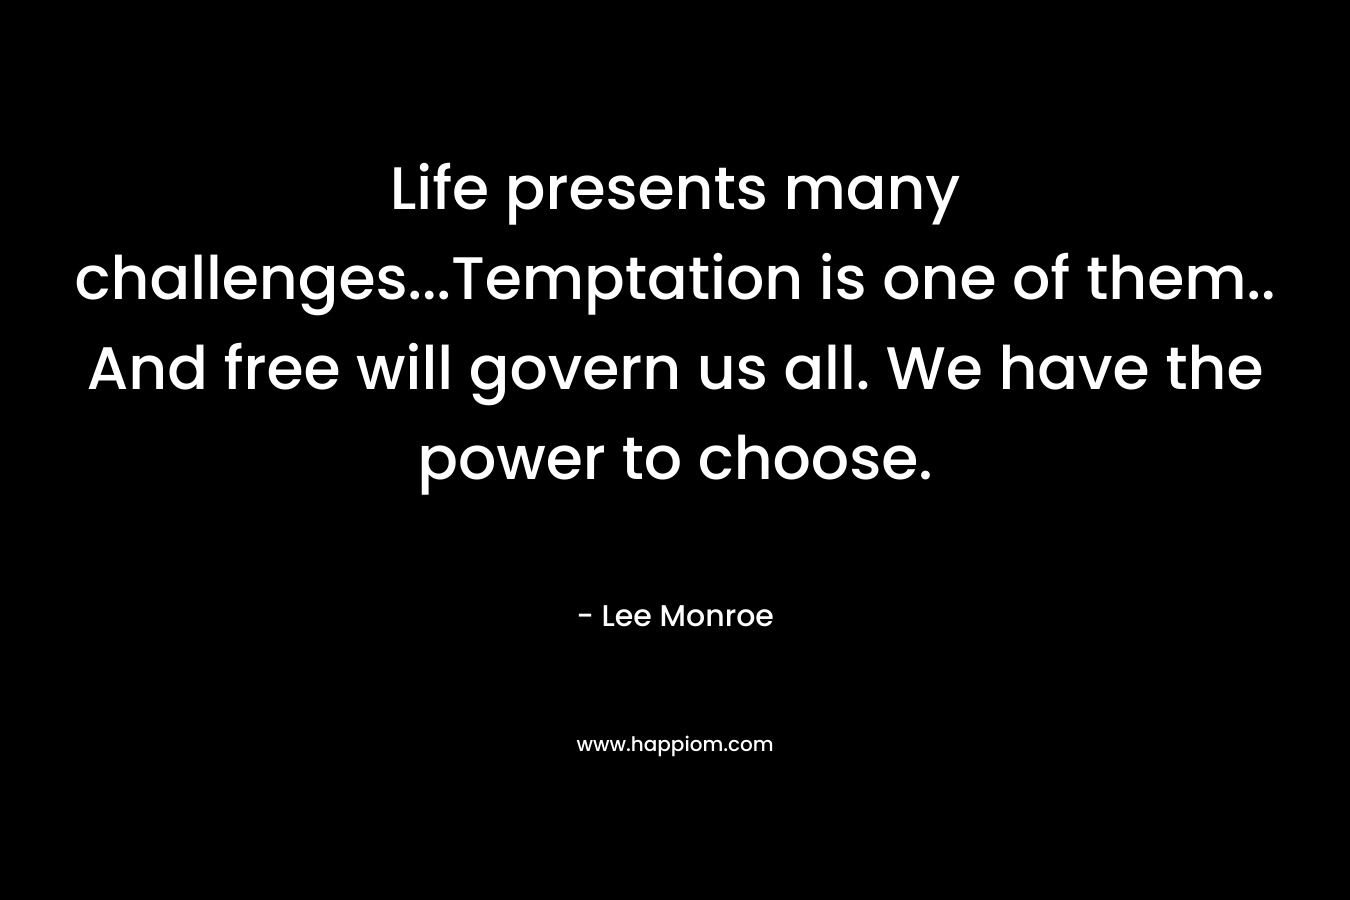 Life presents many challenges...Temptation is one of them.. And free will govern us all. We have the power to choose.